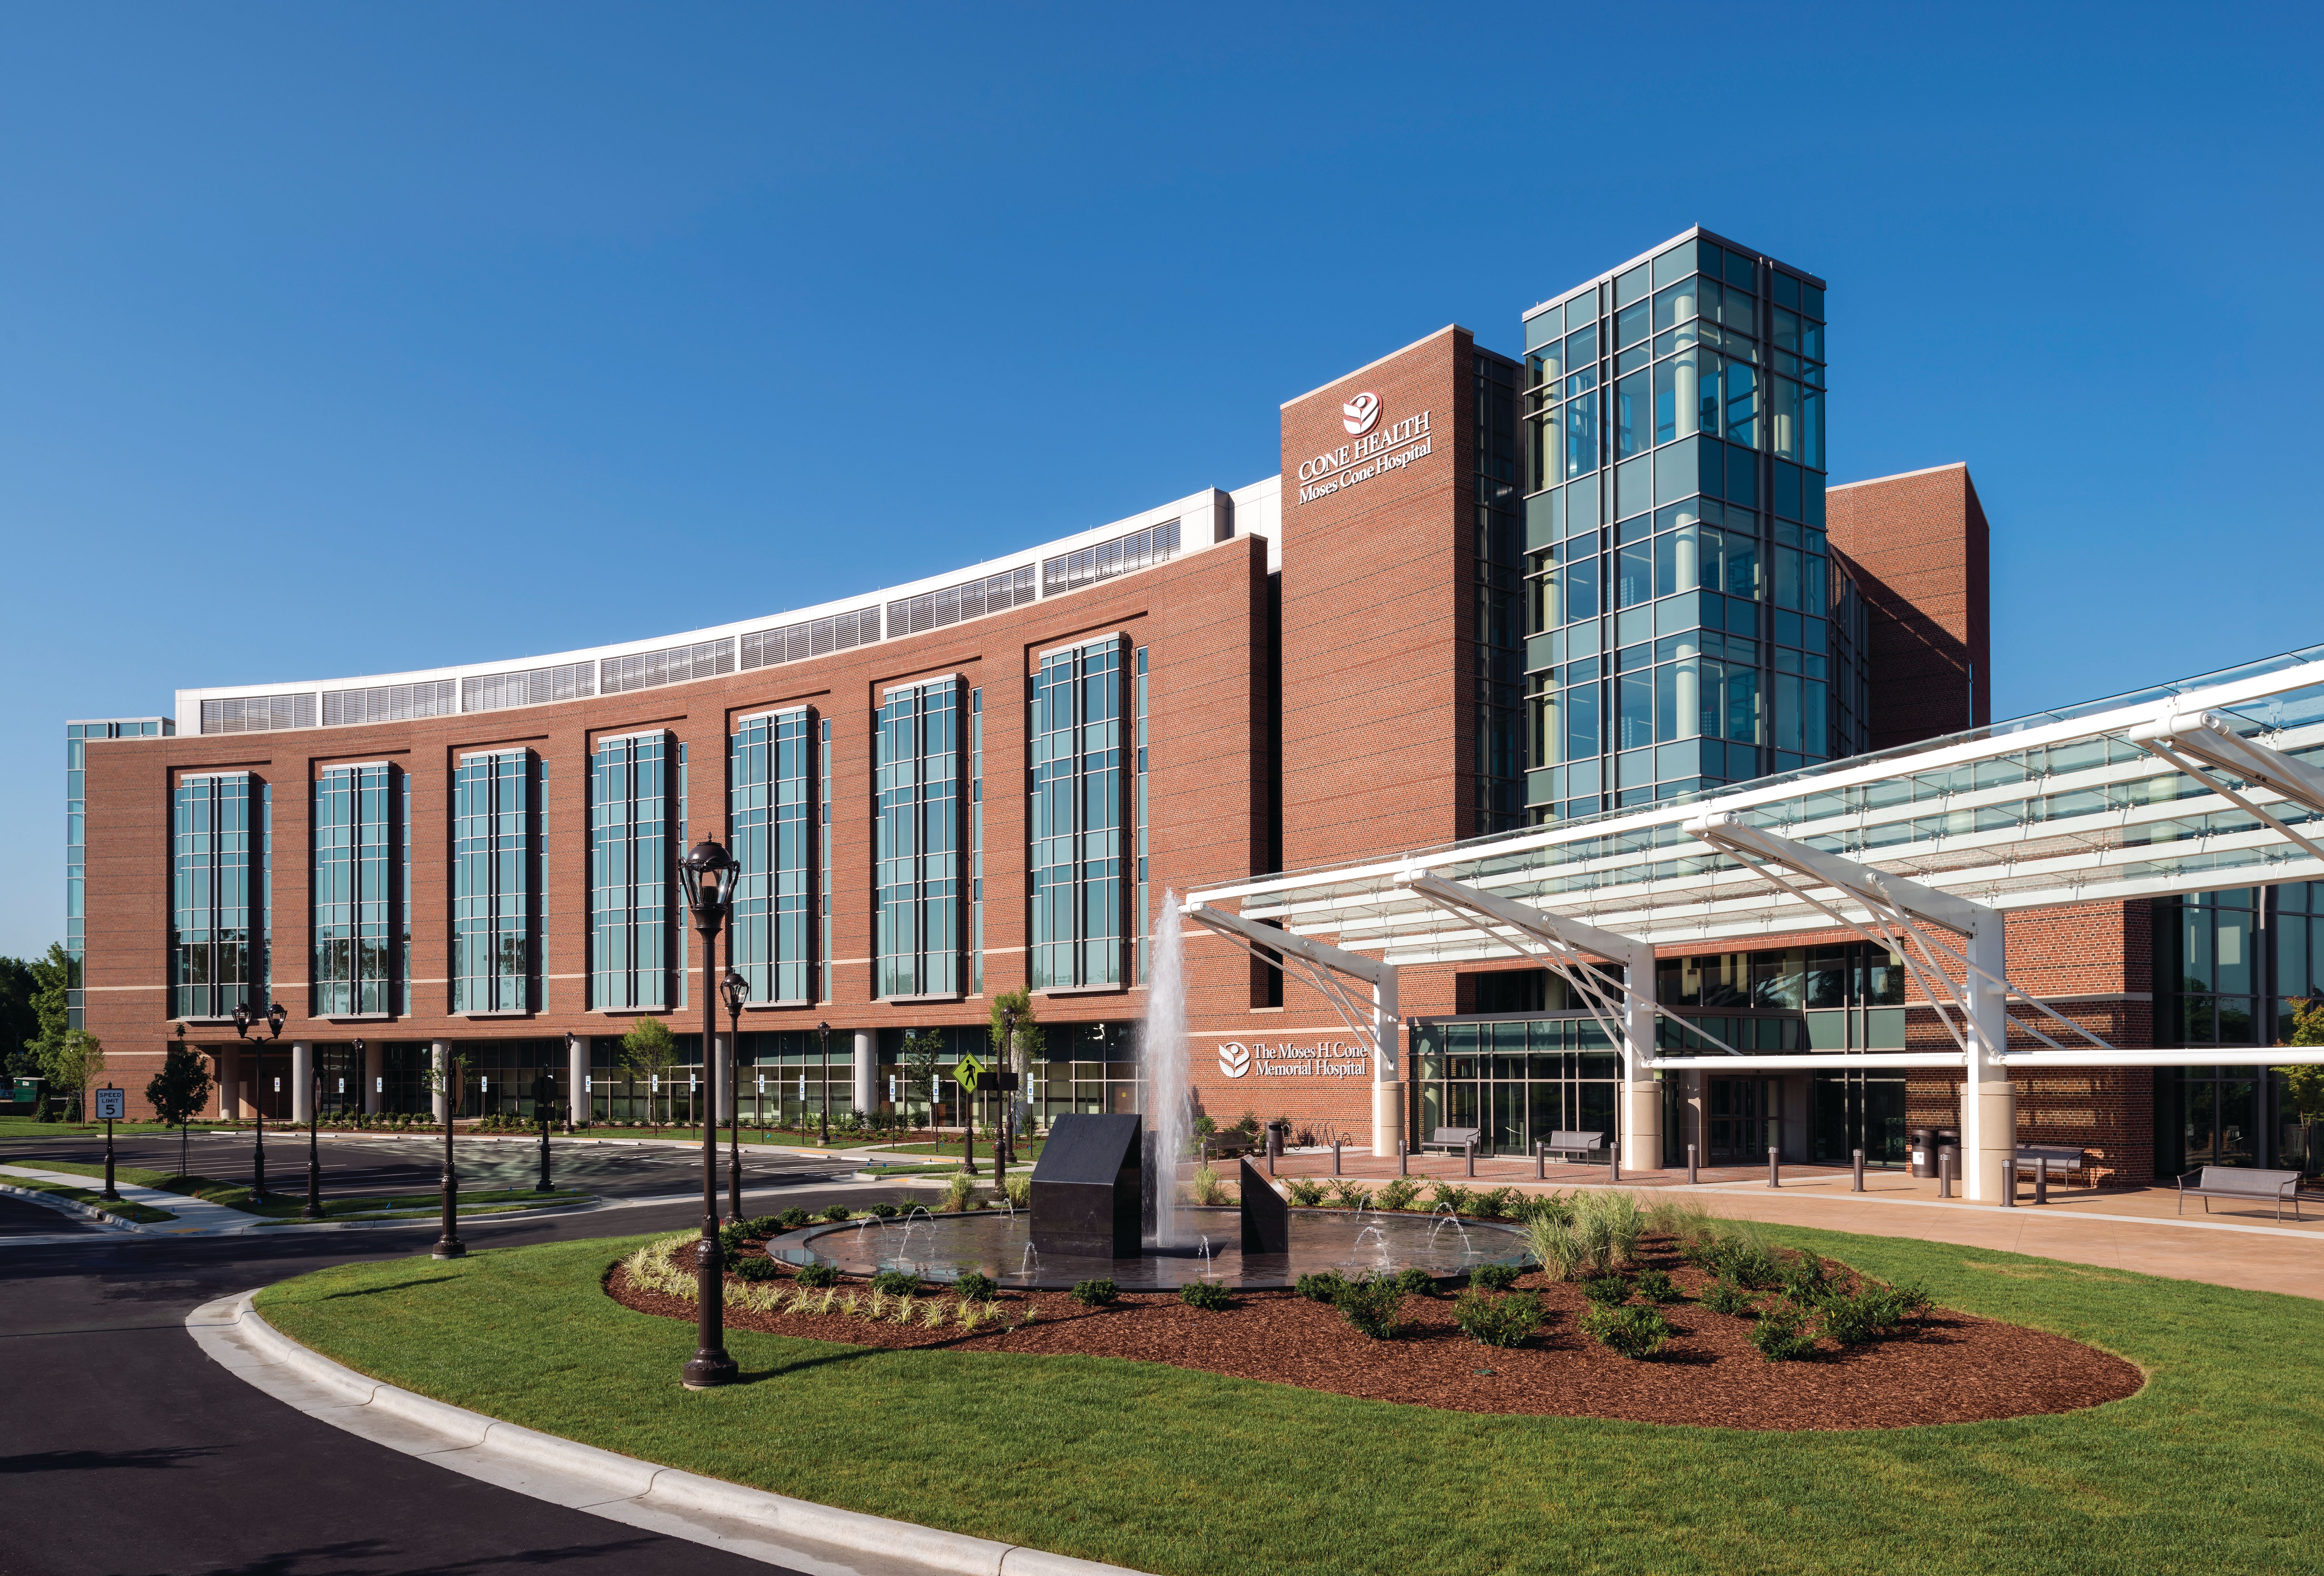 Risant Health plans to acquire North Carolina hospital system